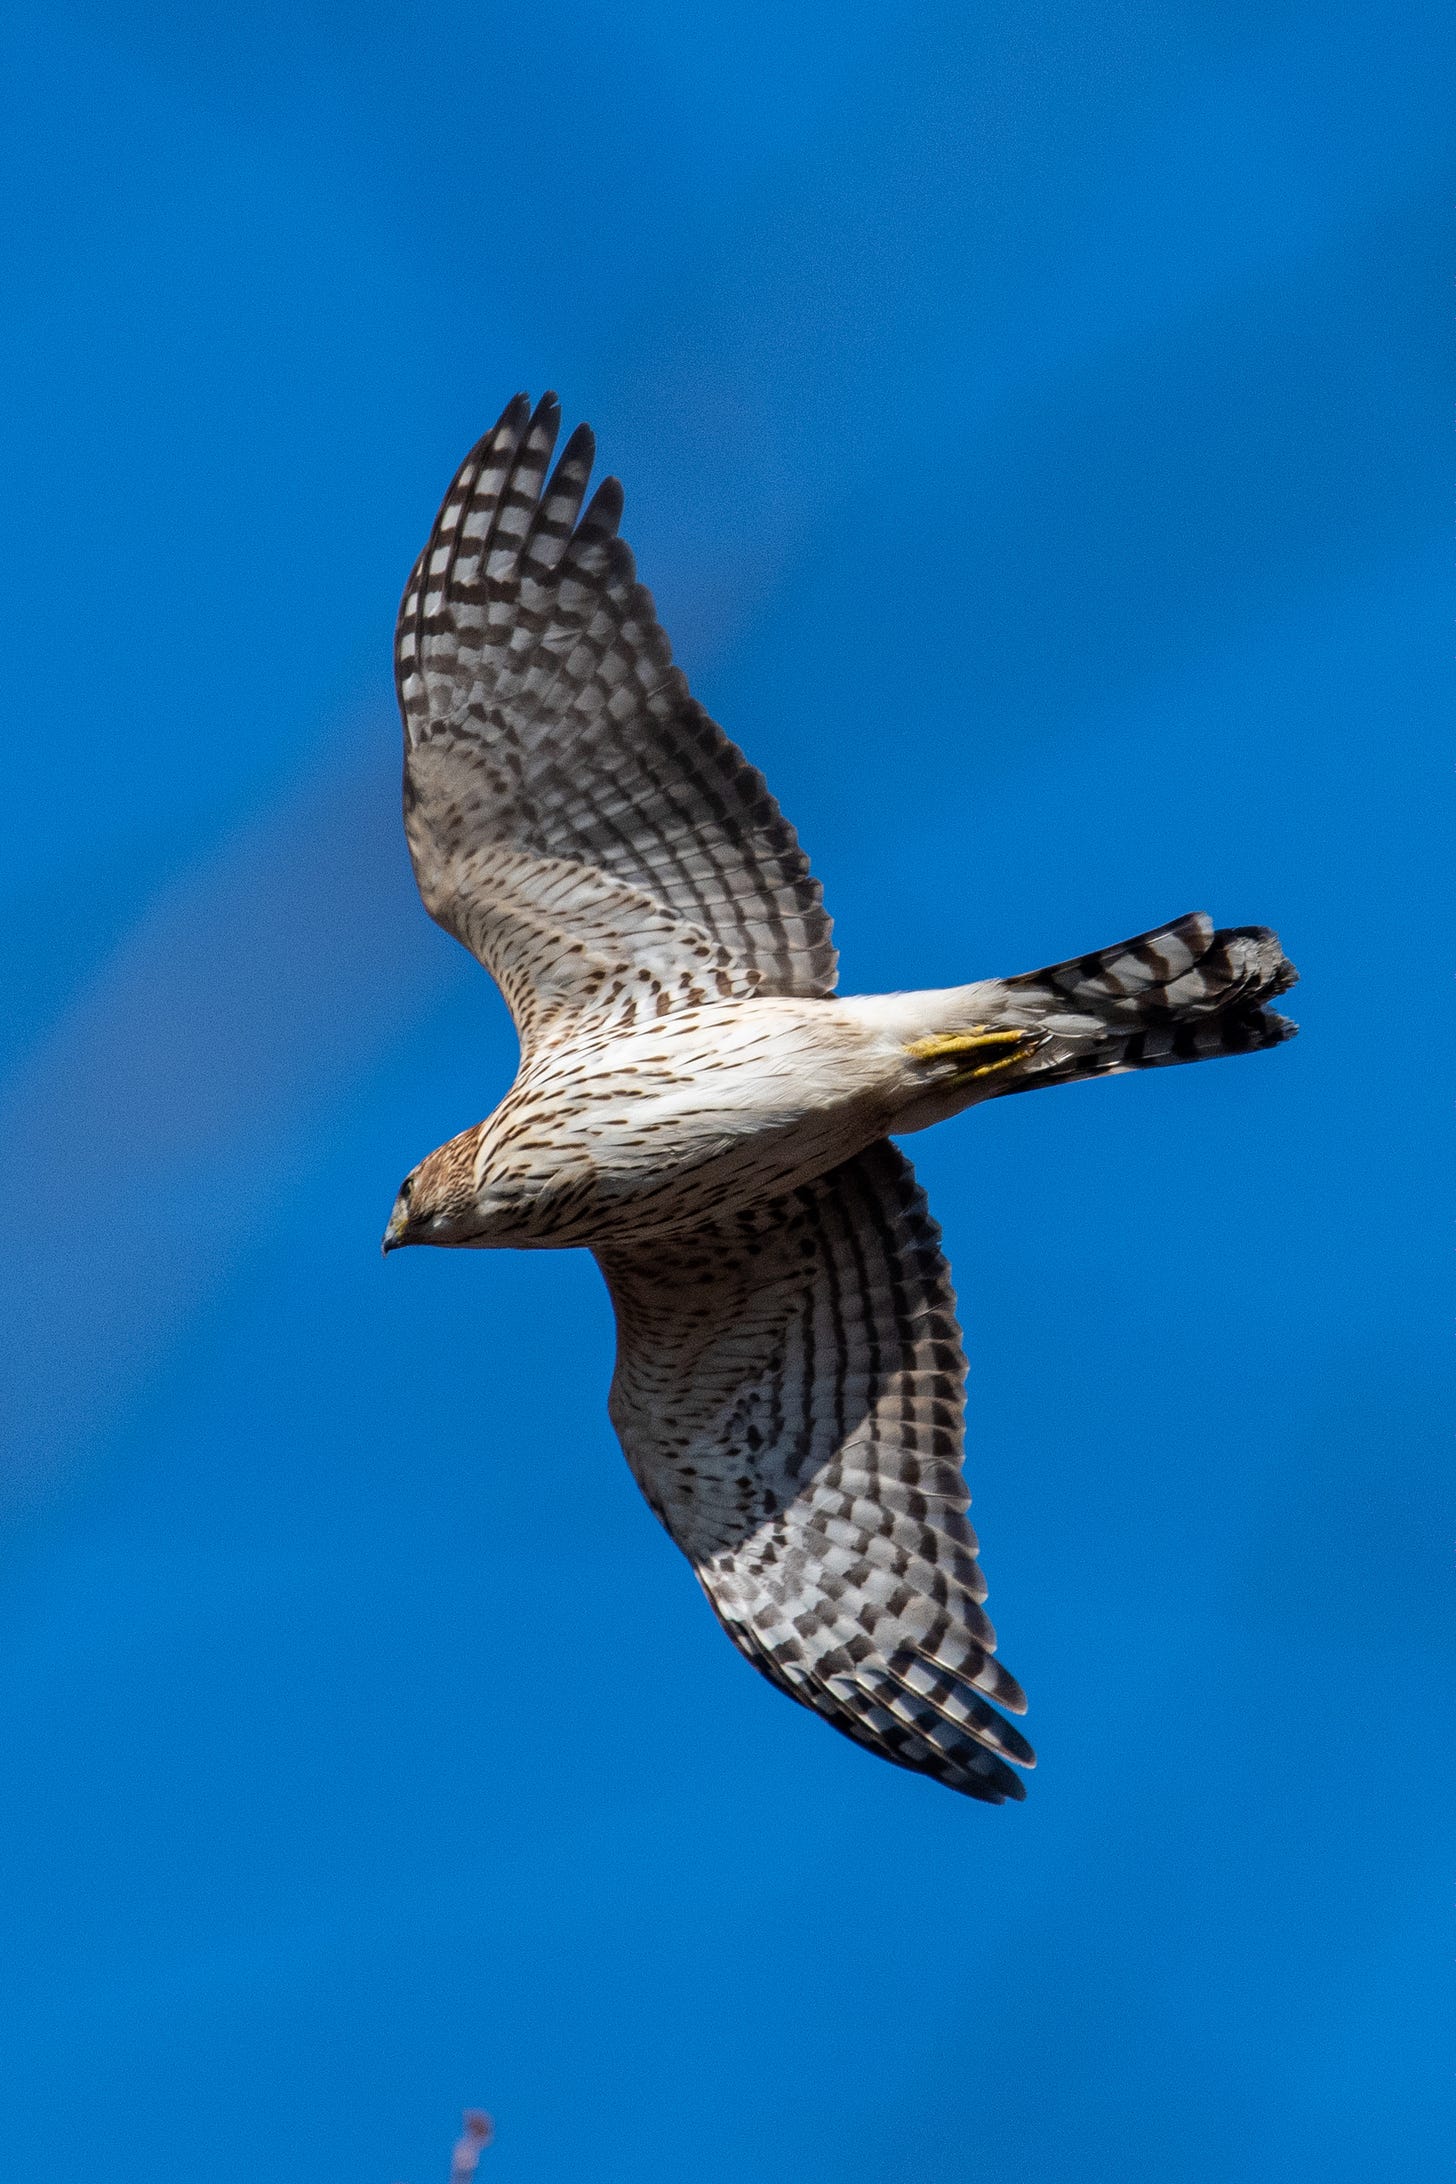 A Cooper's hawk seen from below during a flyover